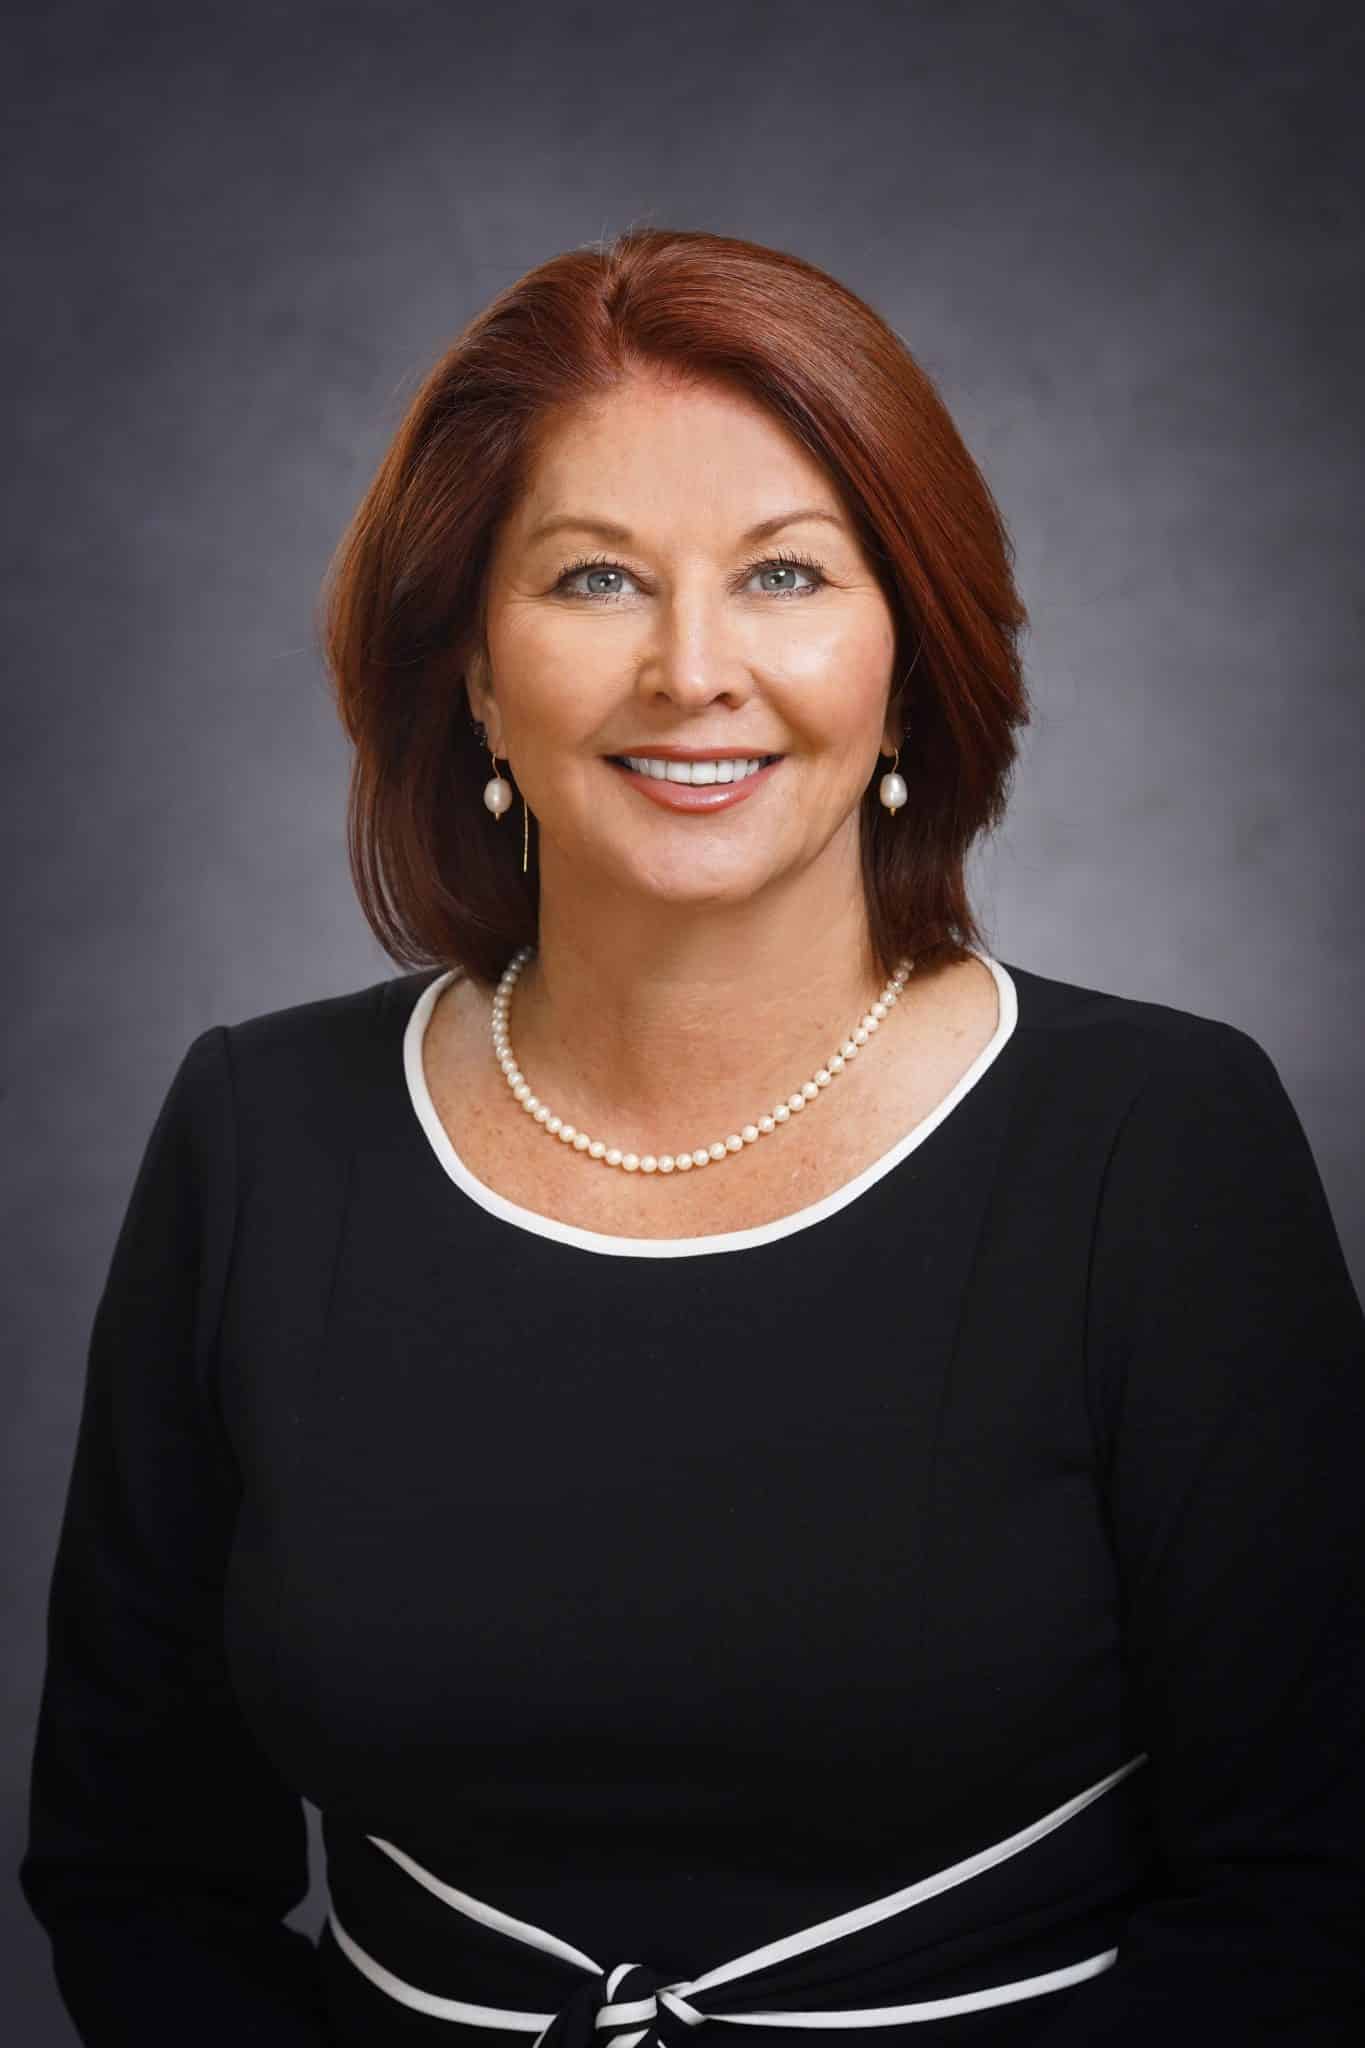 Lisa Morina has been appointed VP of Advancement for Corporate Relations